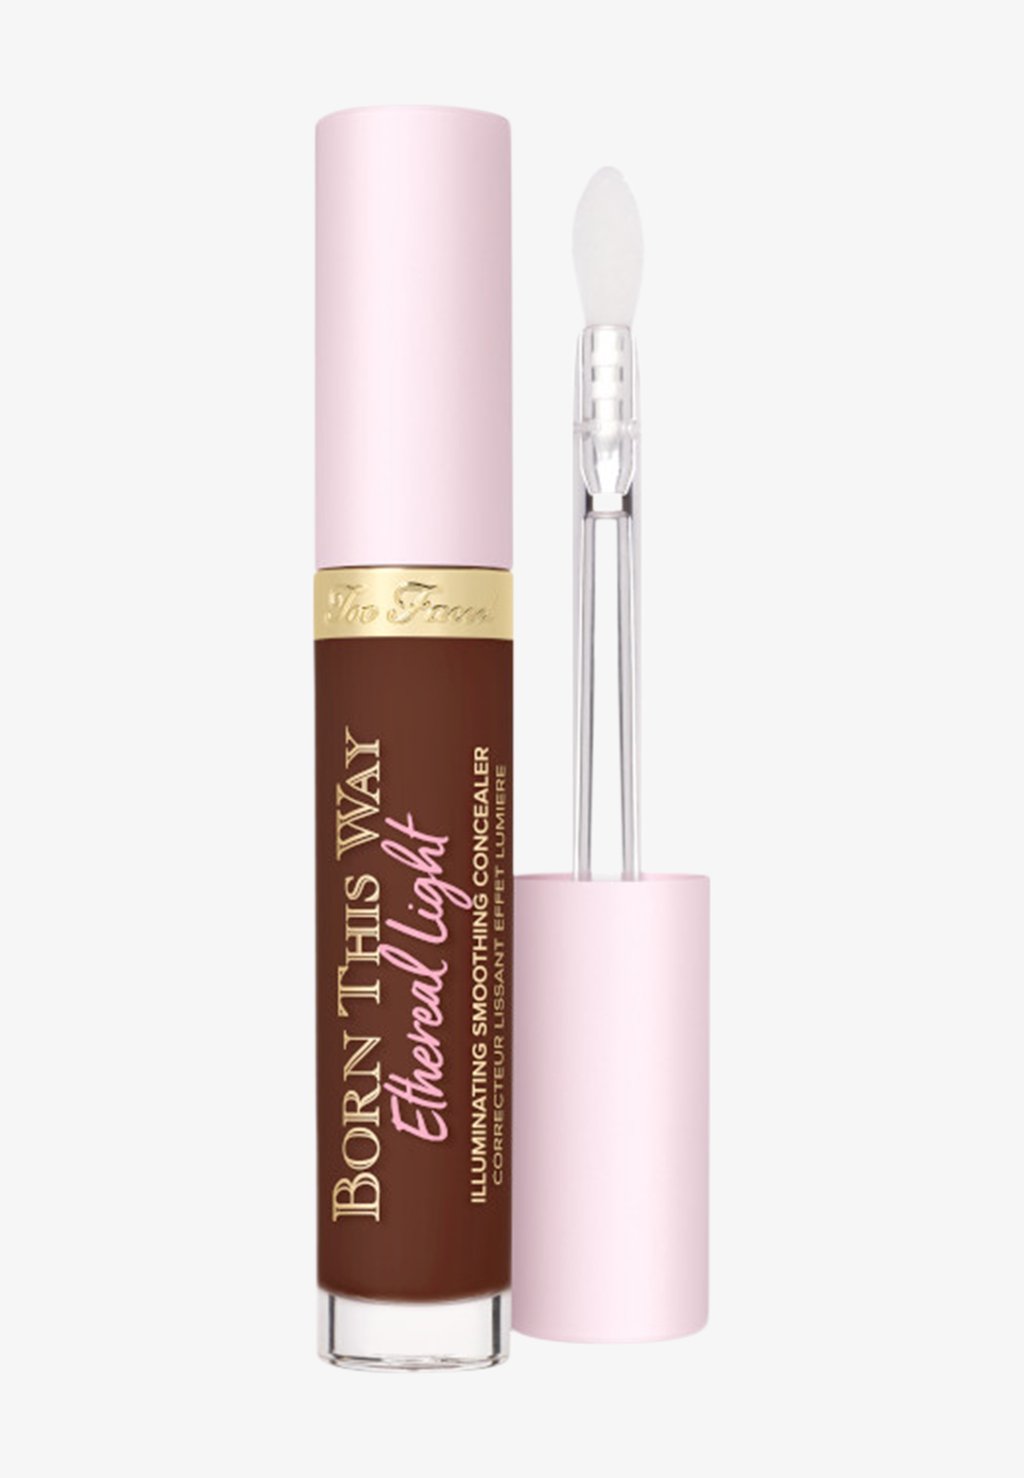 Консилер BORN THIS WAY ETHEREAL LIGHT CONCEALER Too Faced, цвет espresso